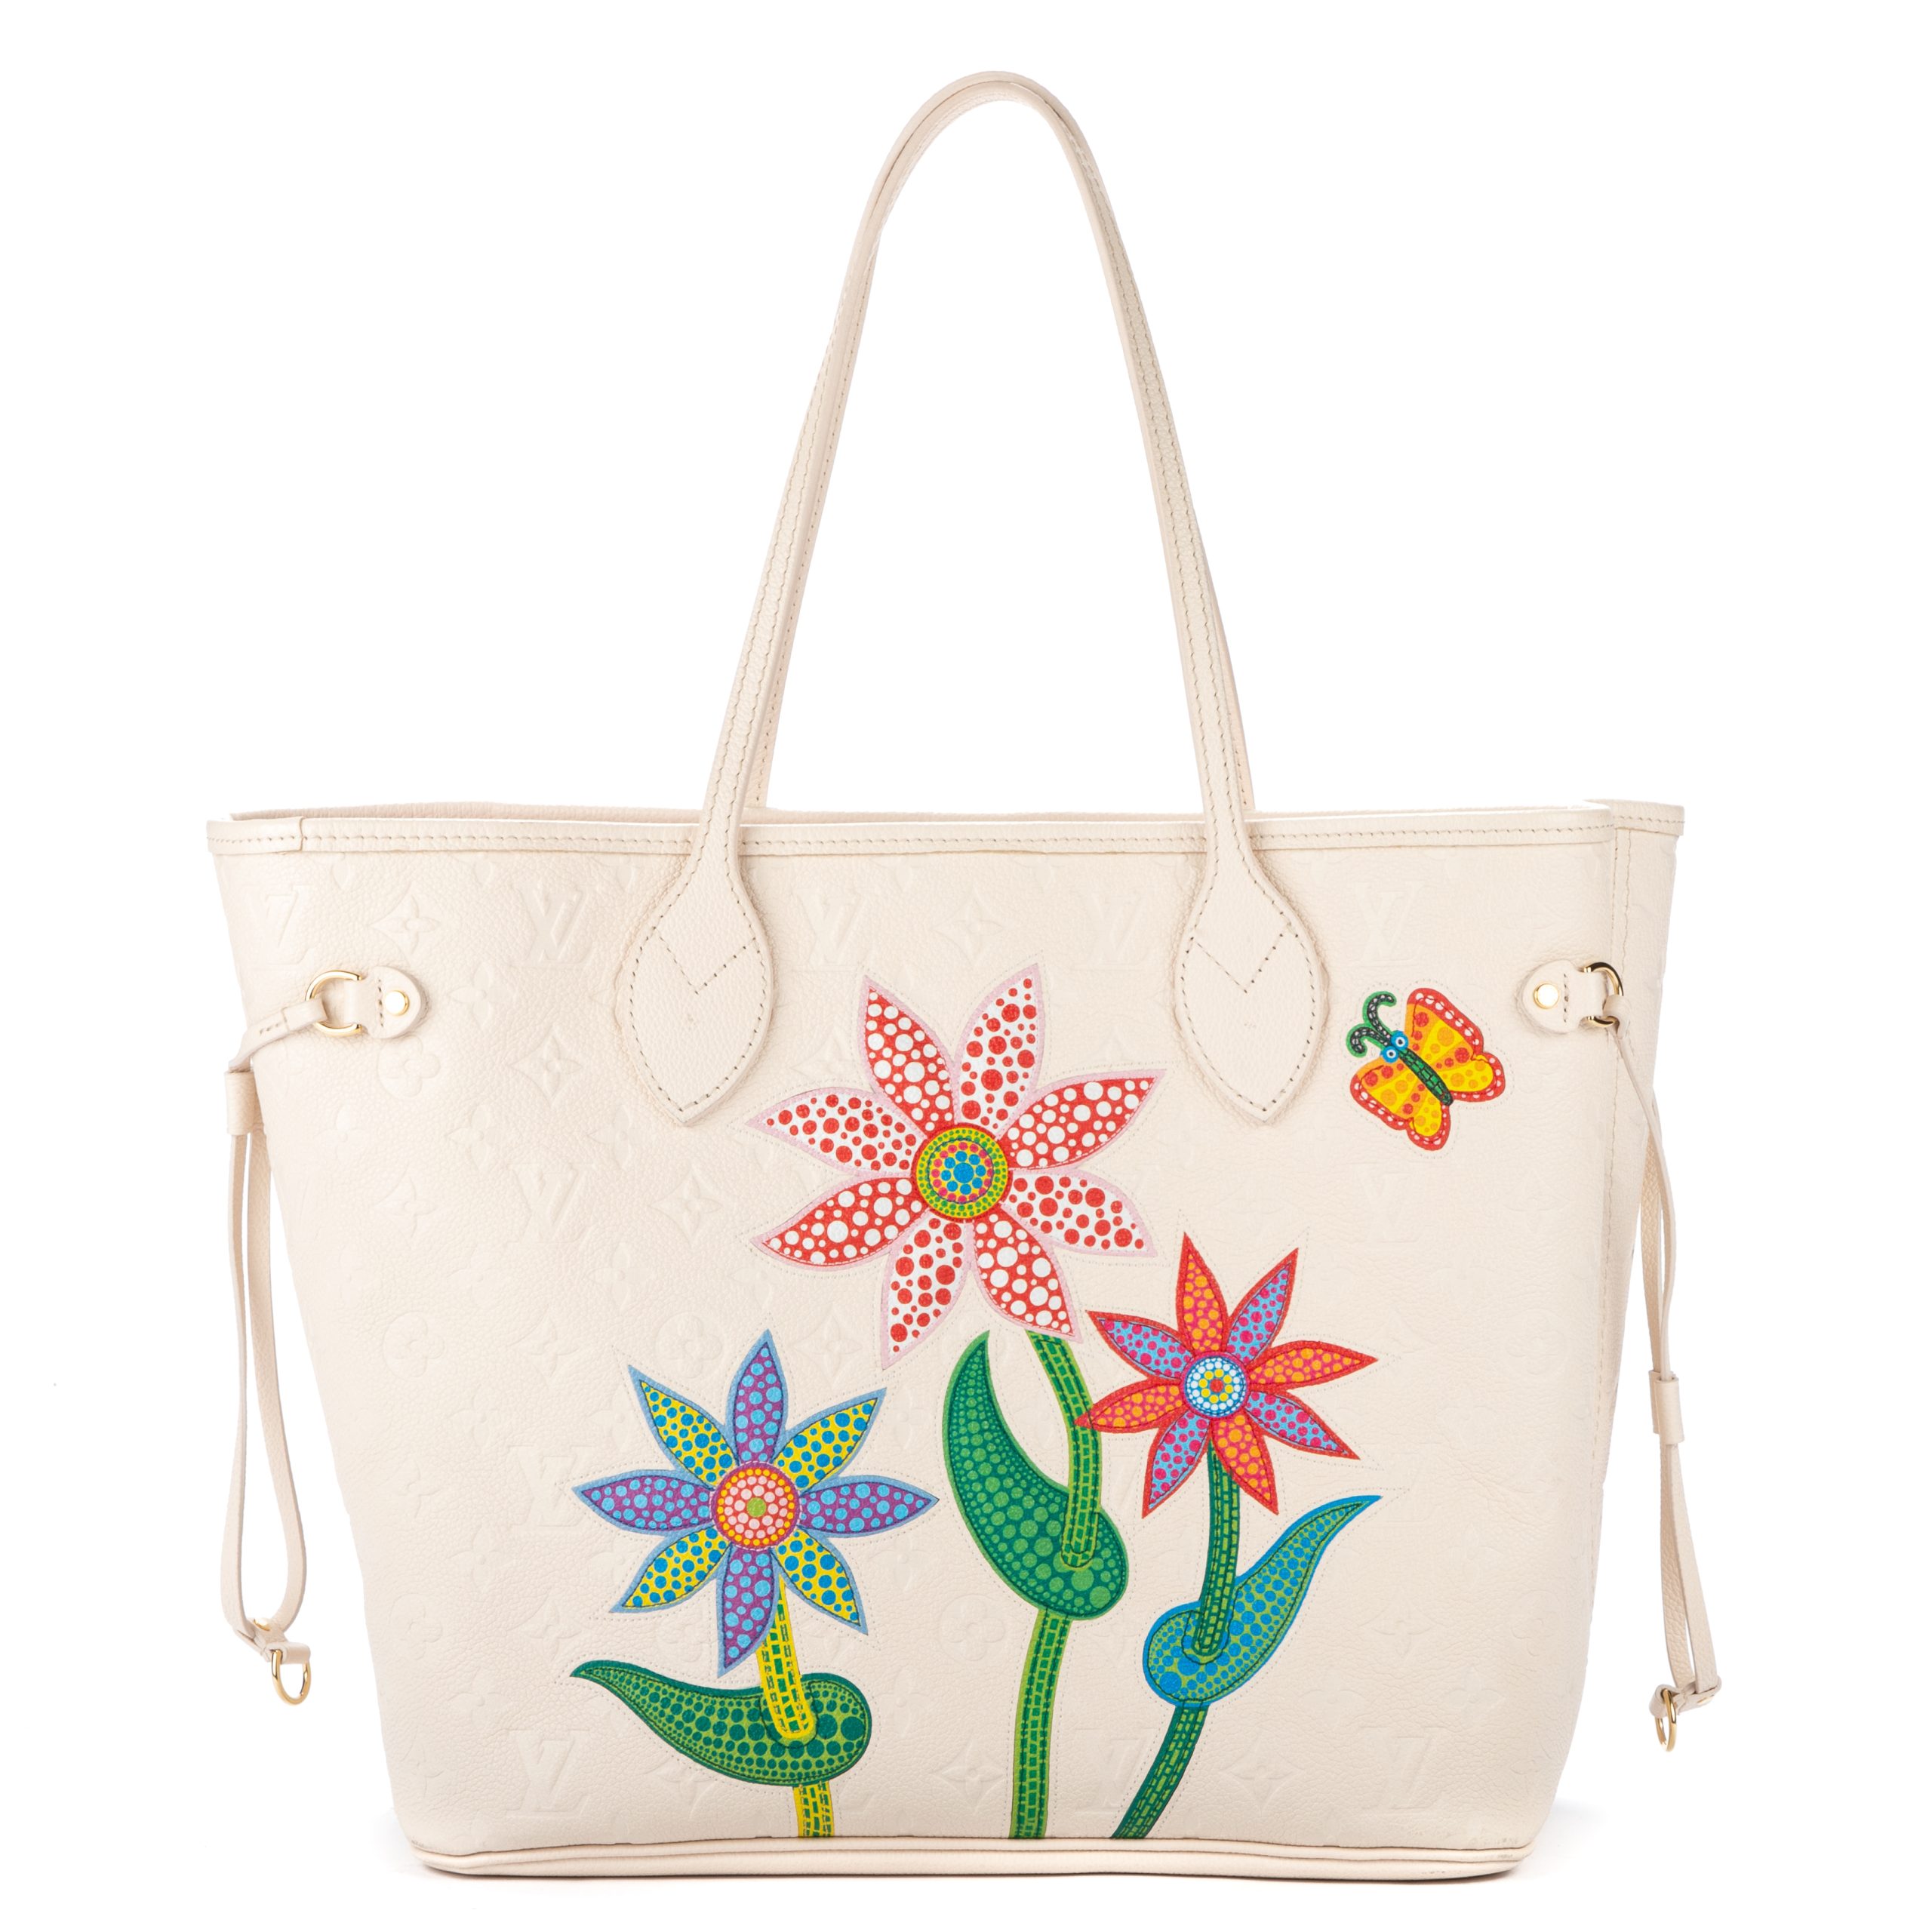 Floral Neverfull